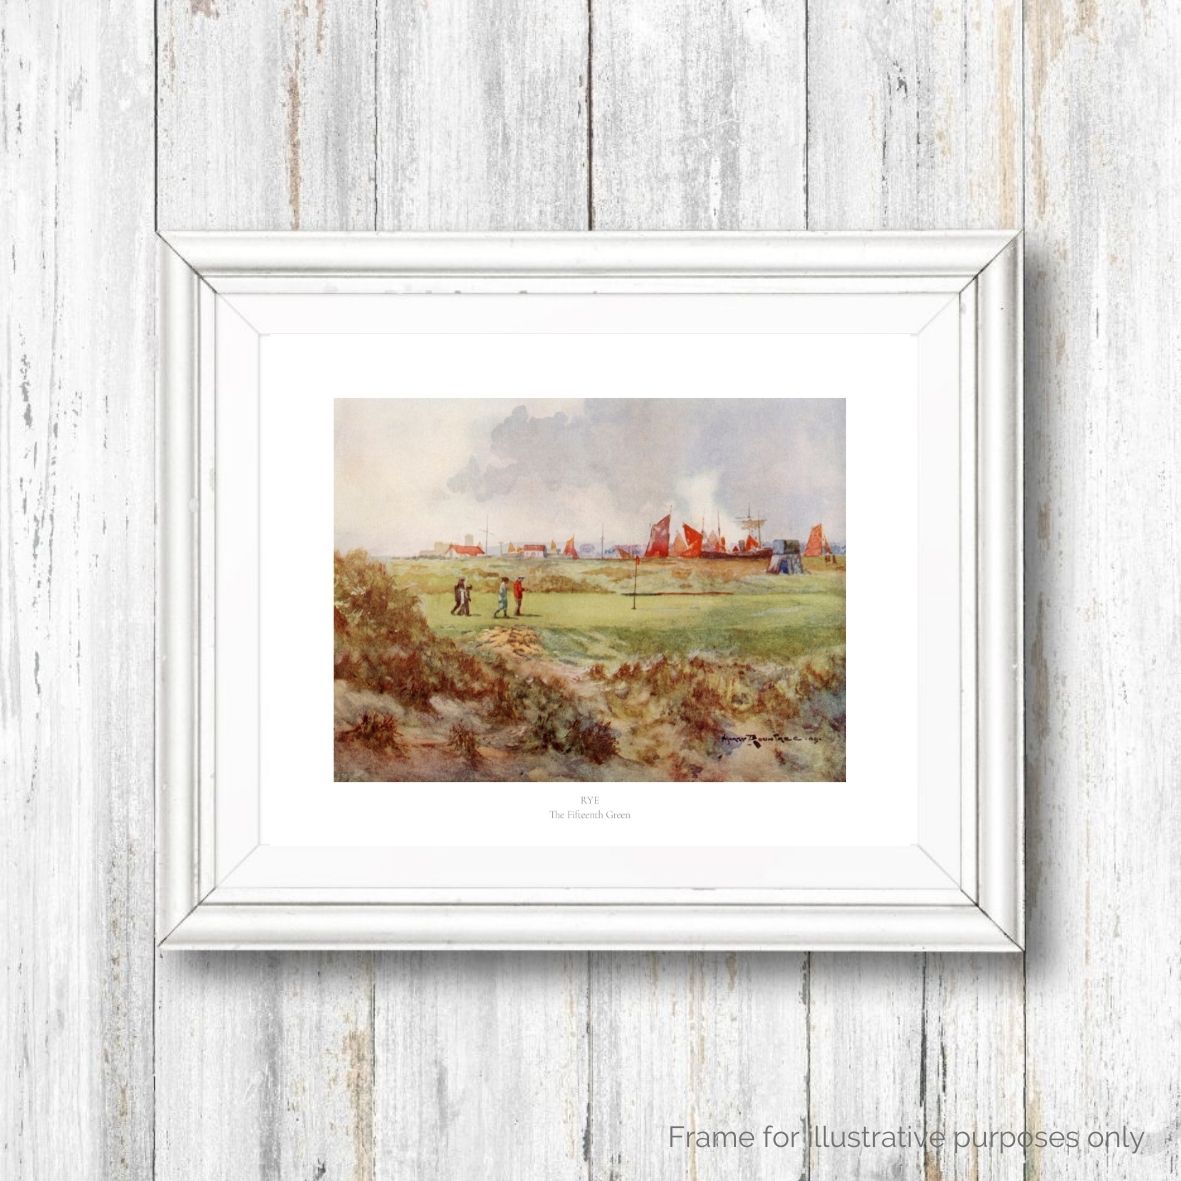 Rye Golf Club framed print with text by Harry Rountree